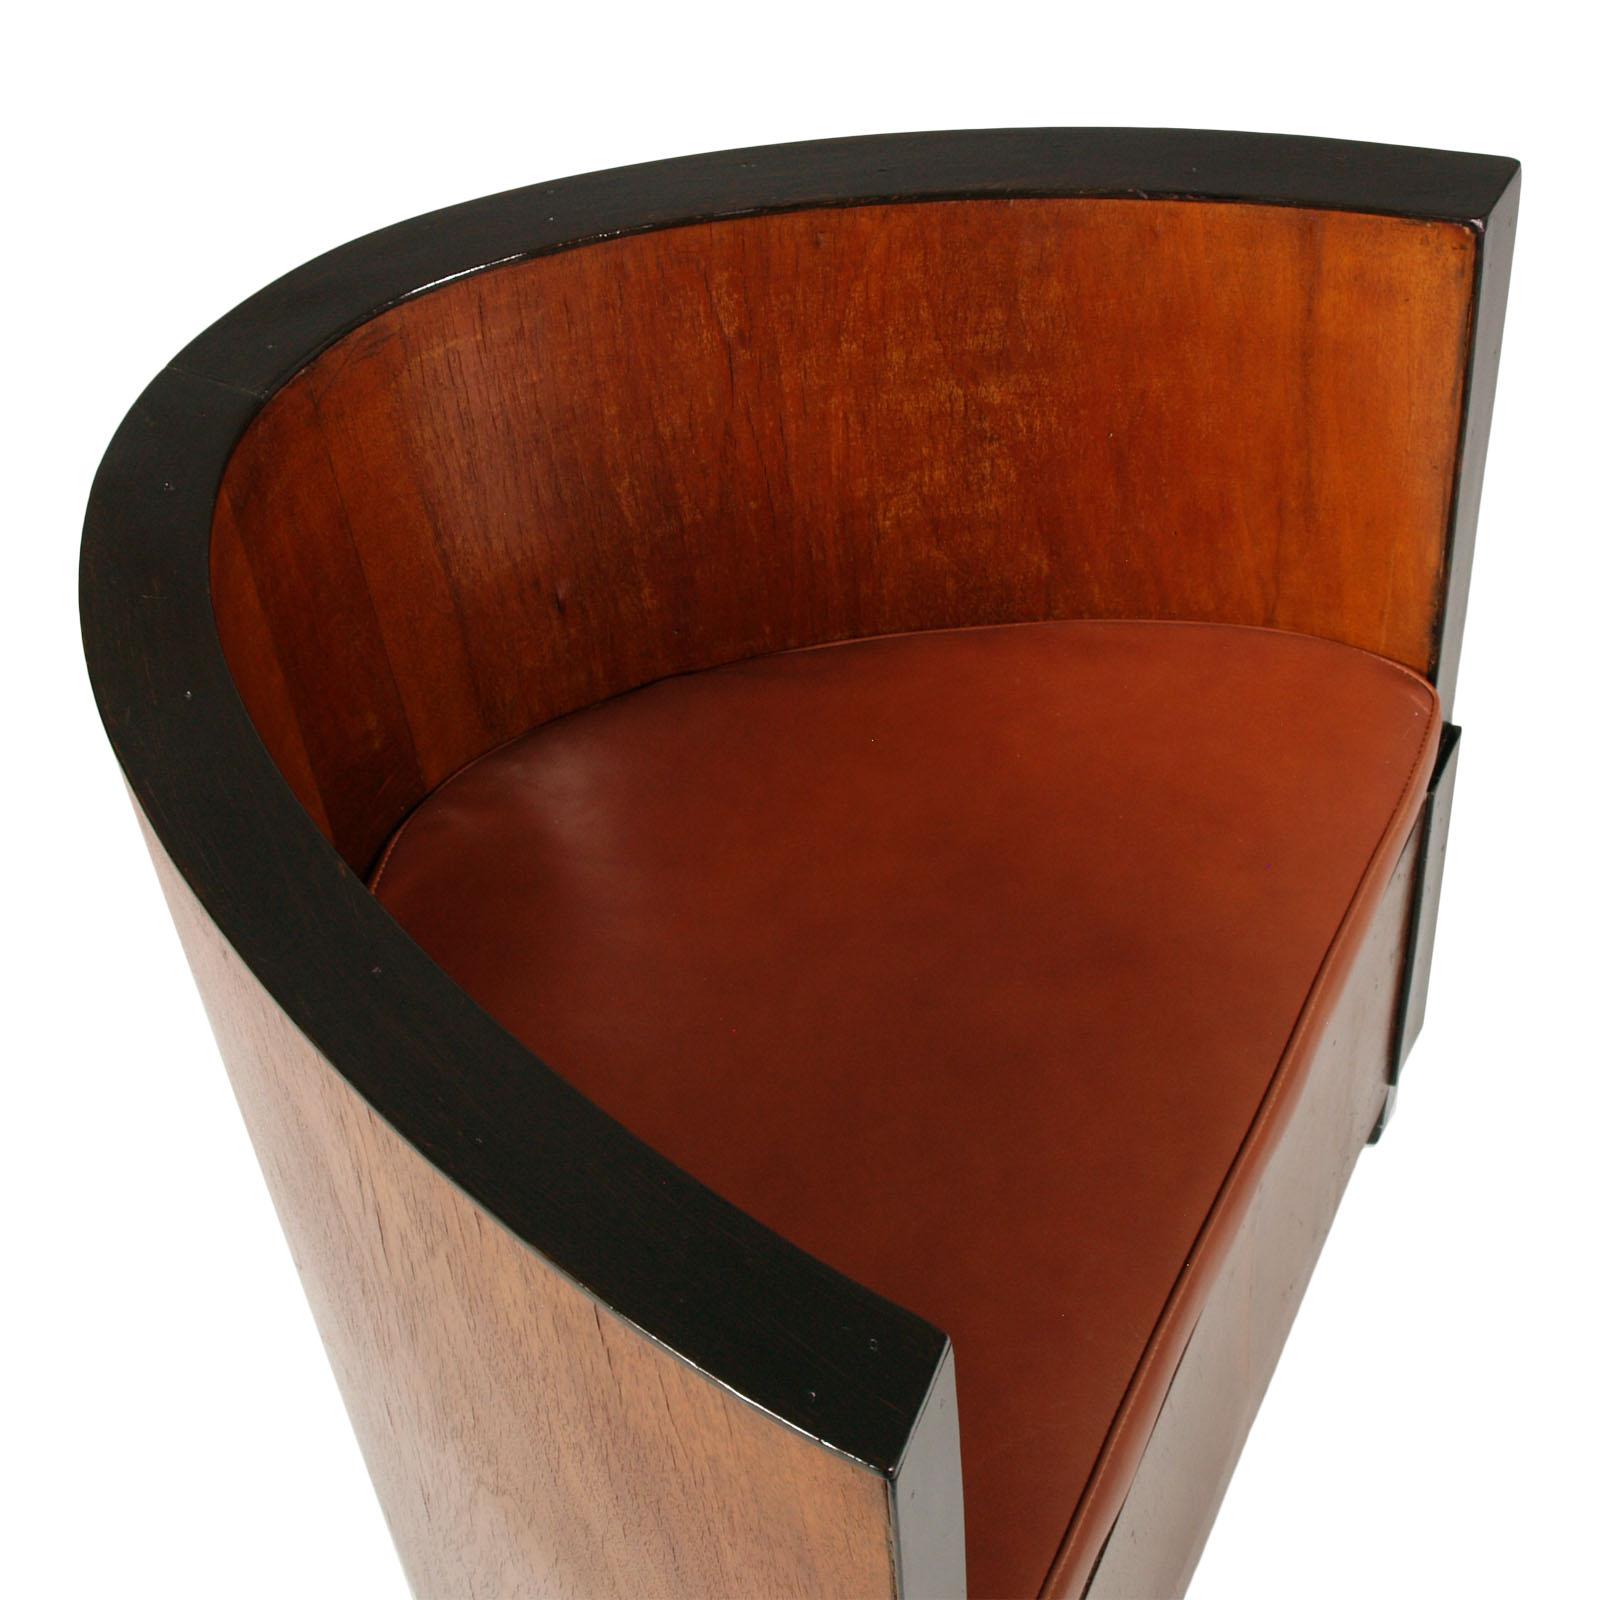 Art Deco Armchair by Gino Maggioni for Atelier Borsani Varedo New Leather Upholstered For Sale